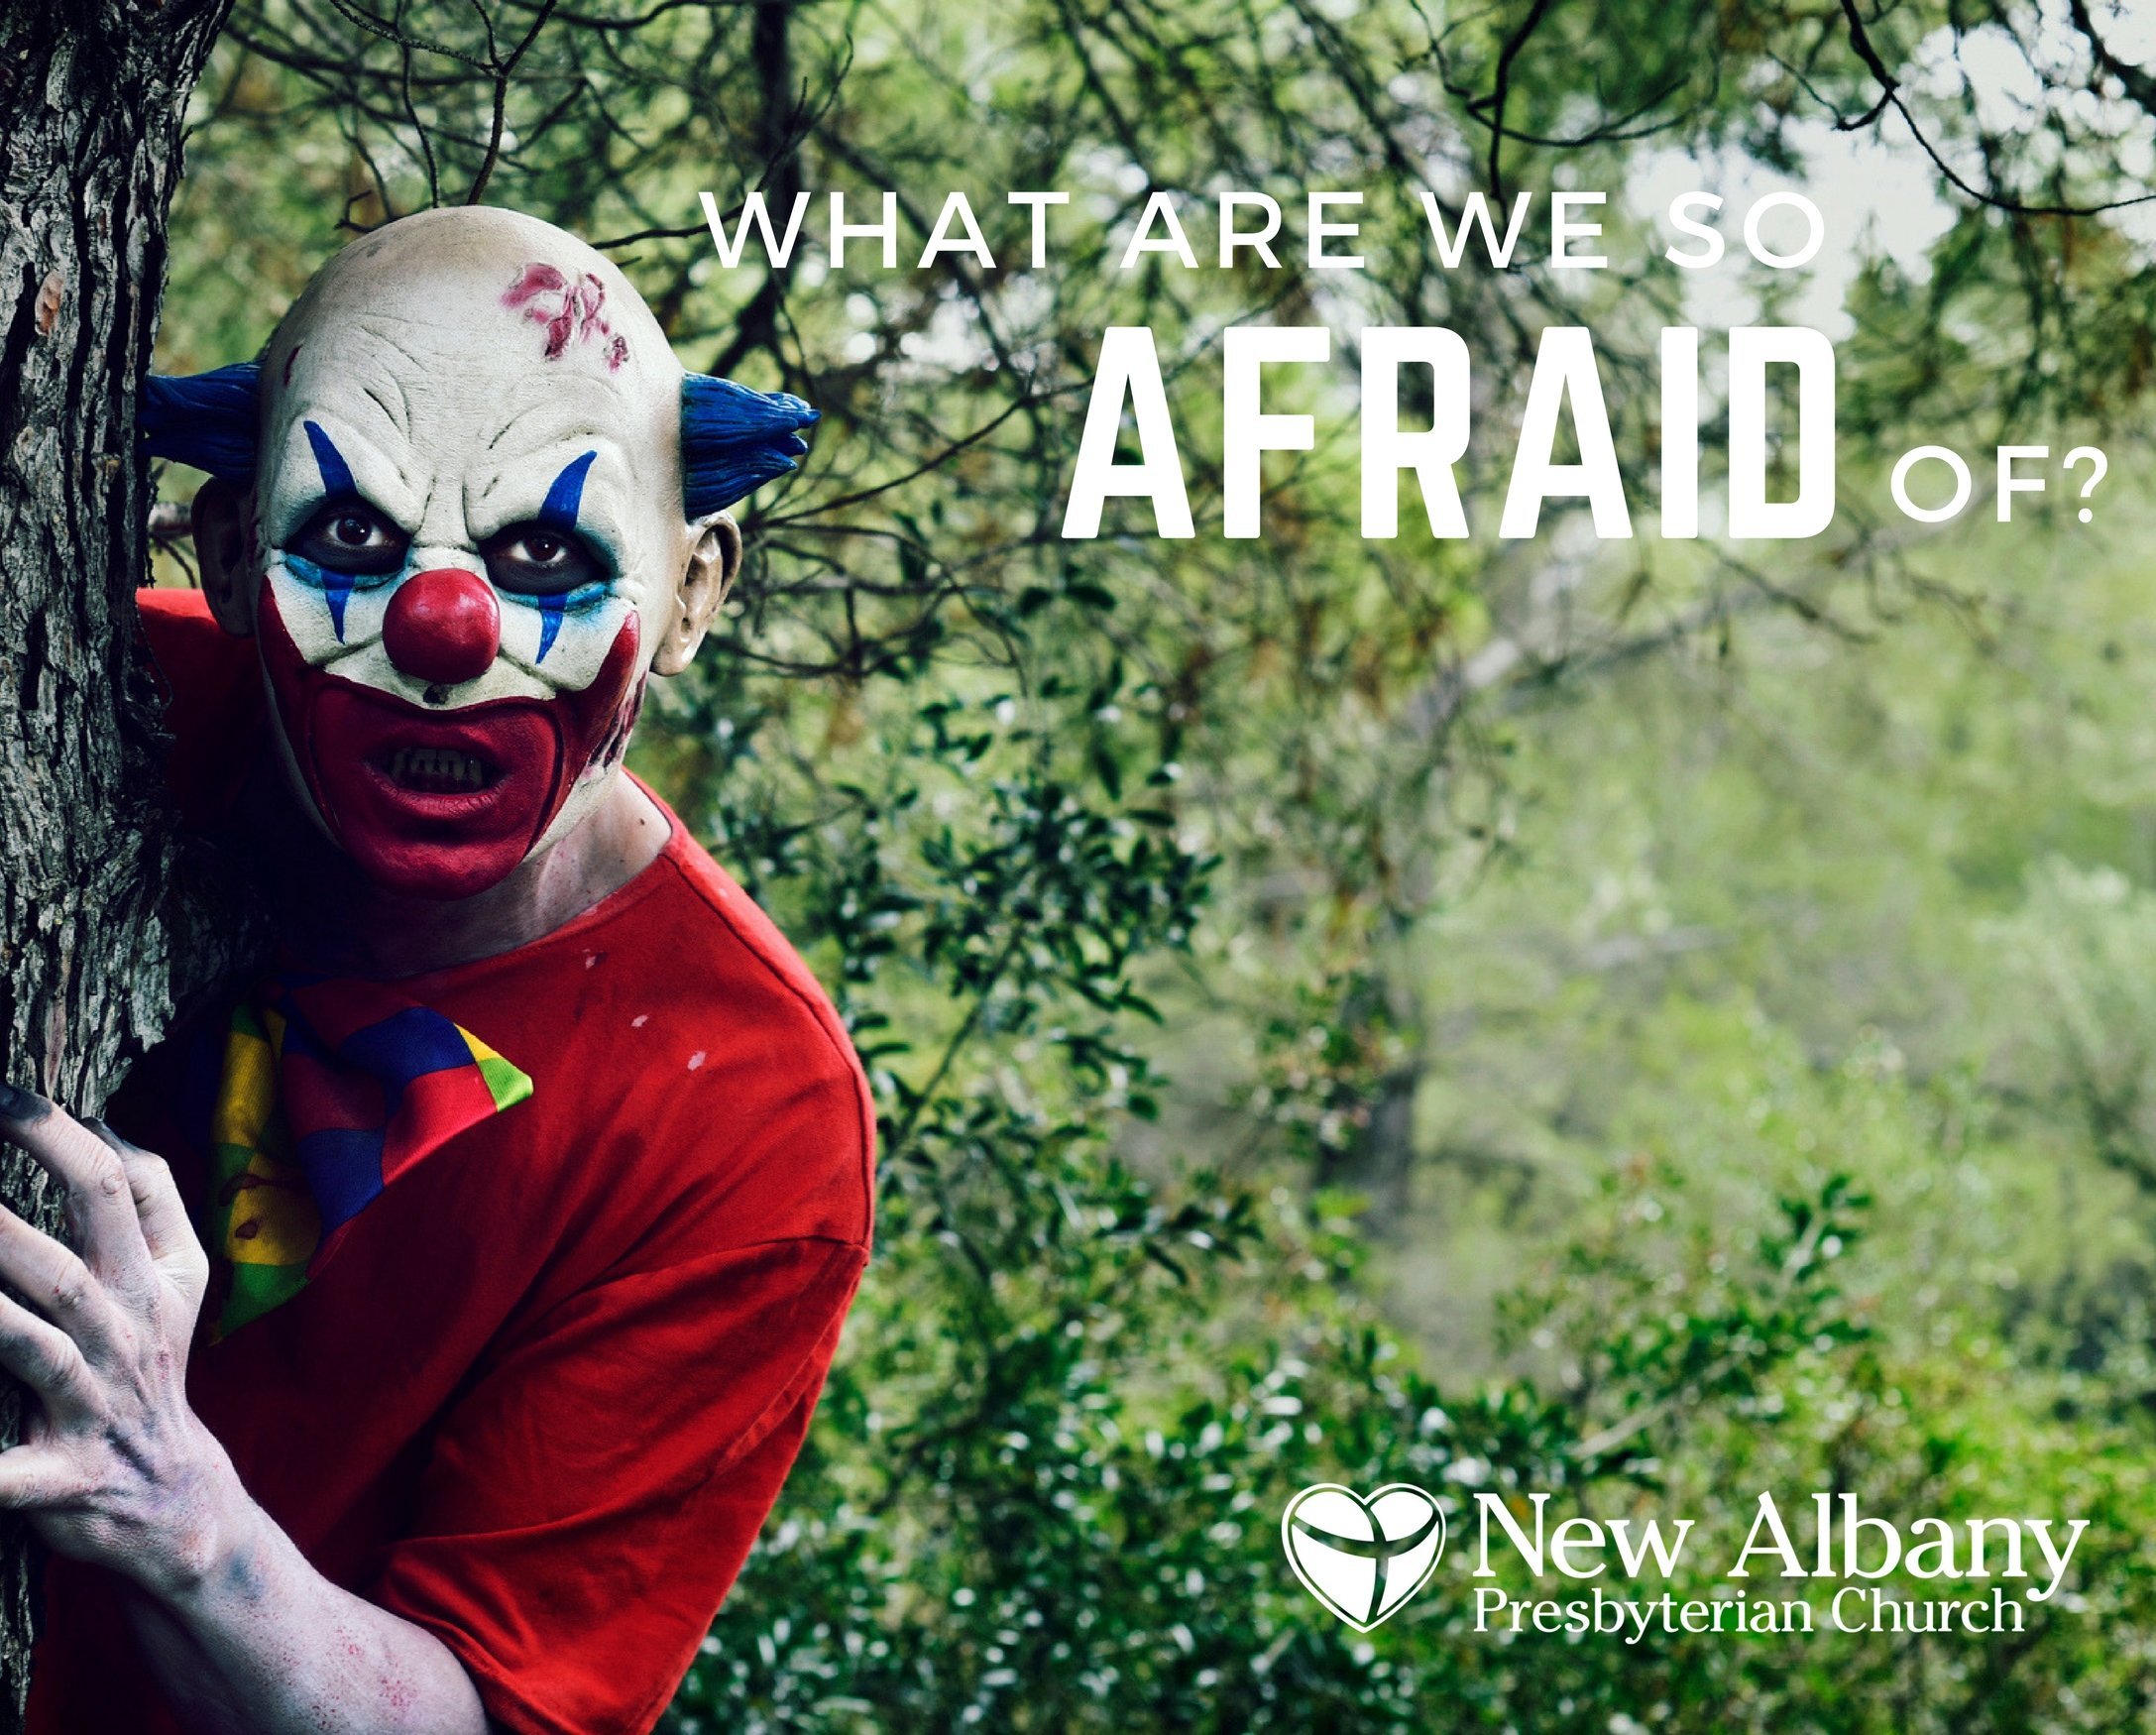 What are we so afraid of? Fear of being a “Jesus Freak”